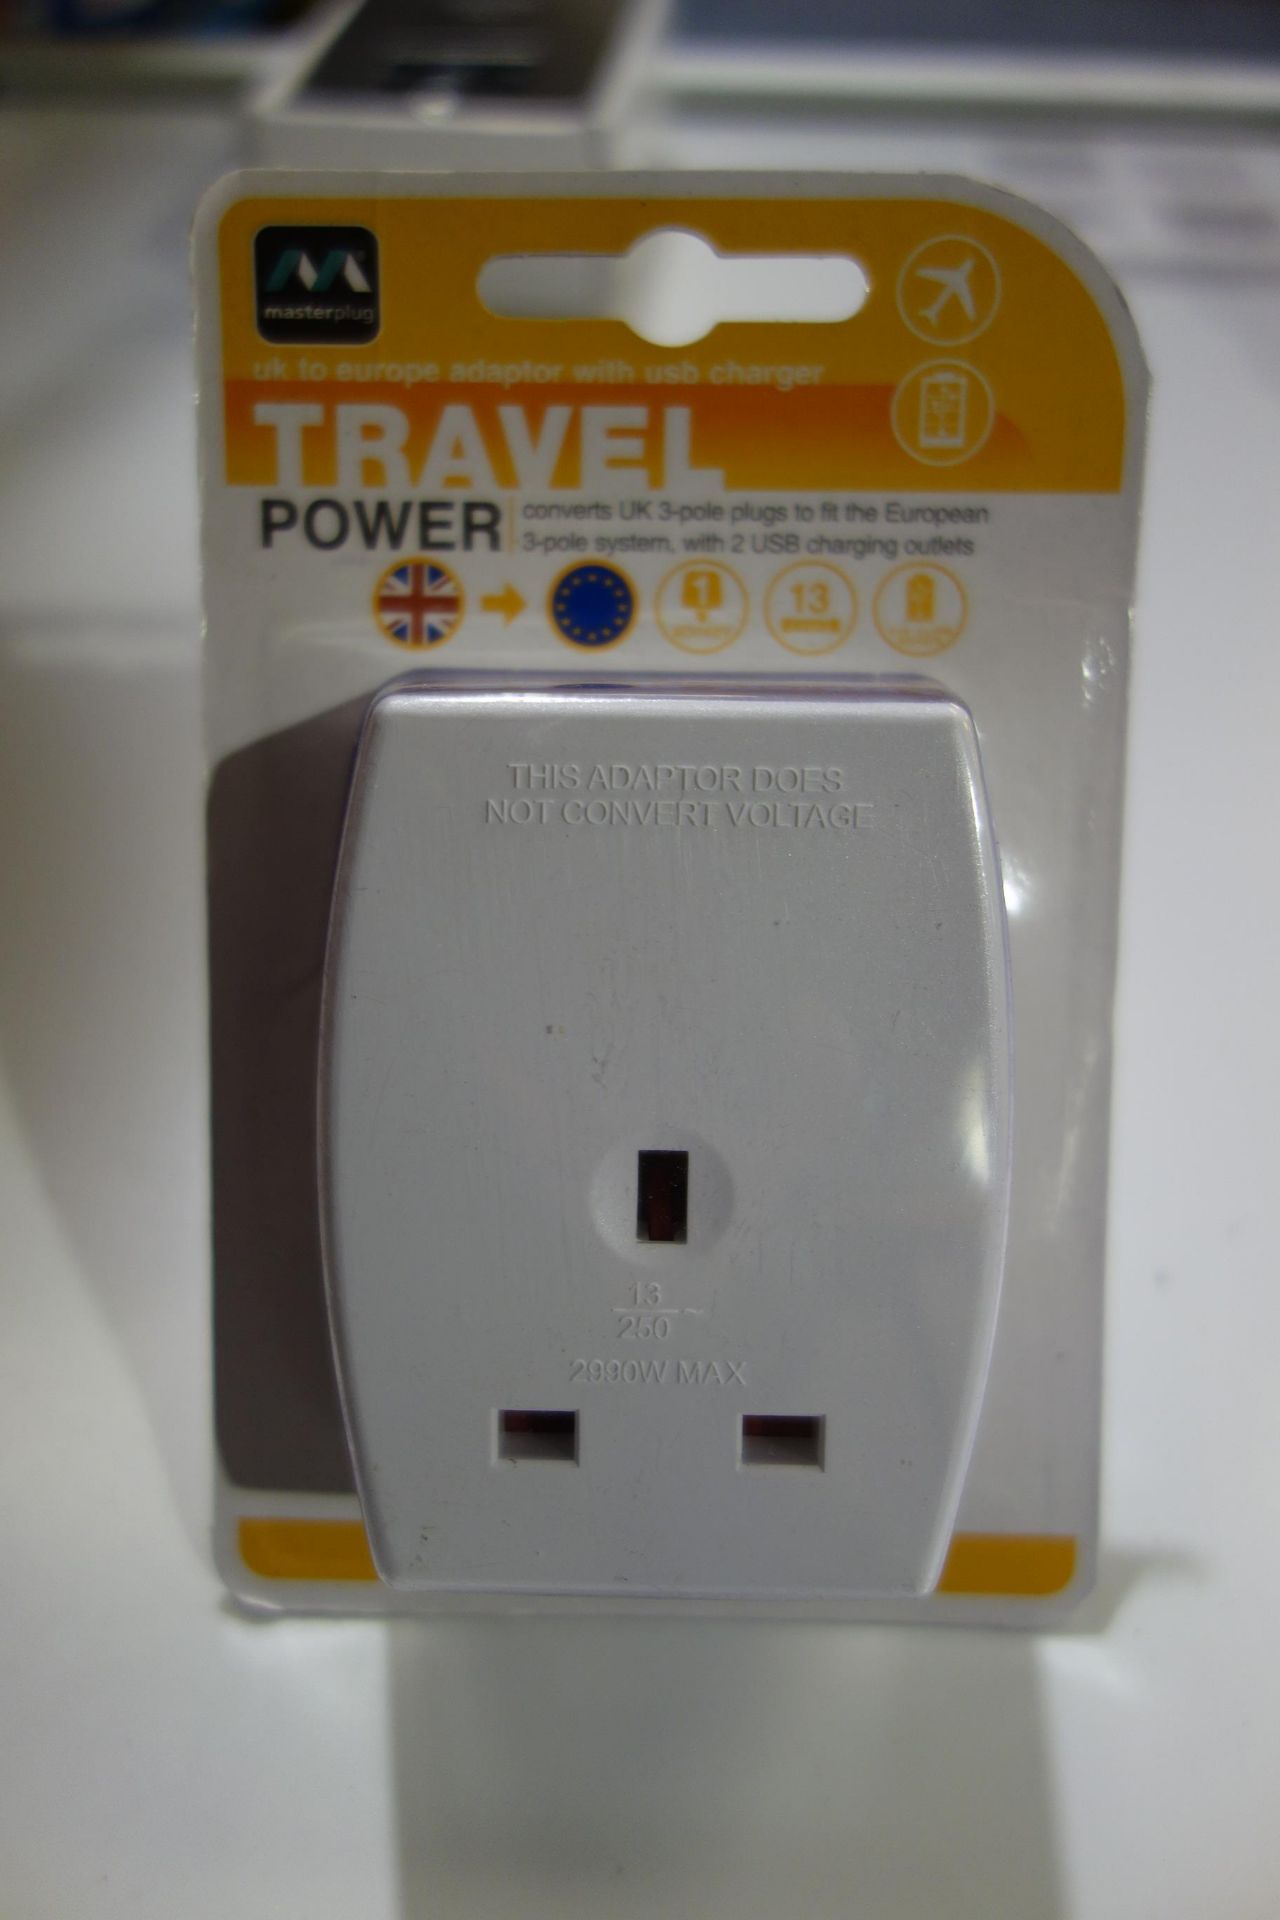 30 x Masterplug Travel Power UK to Europe Adaptor With 2x USB Charging Outlets